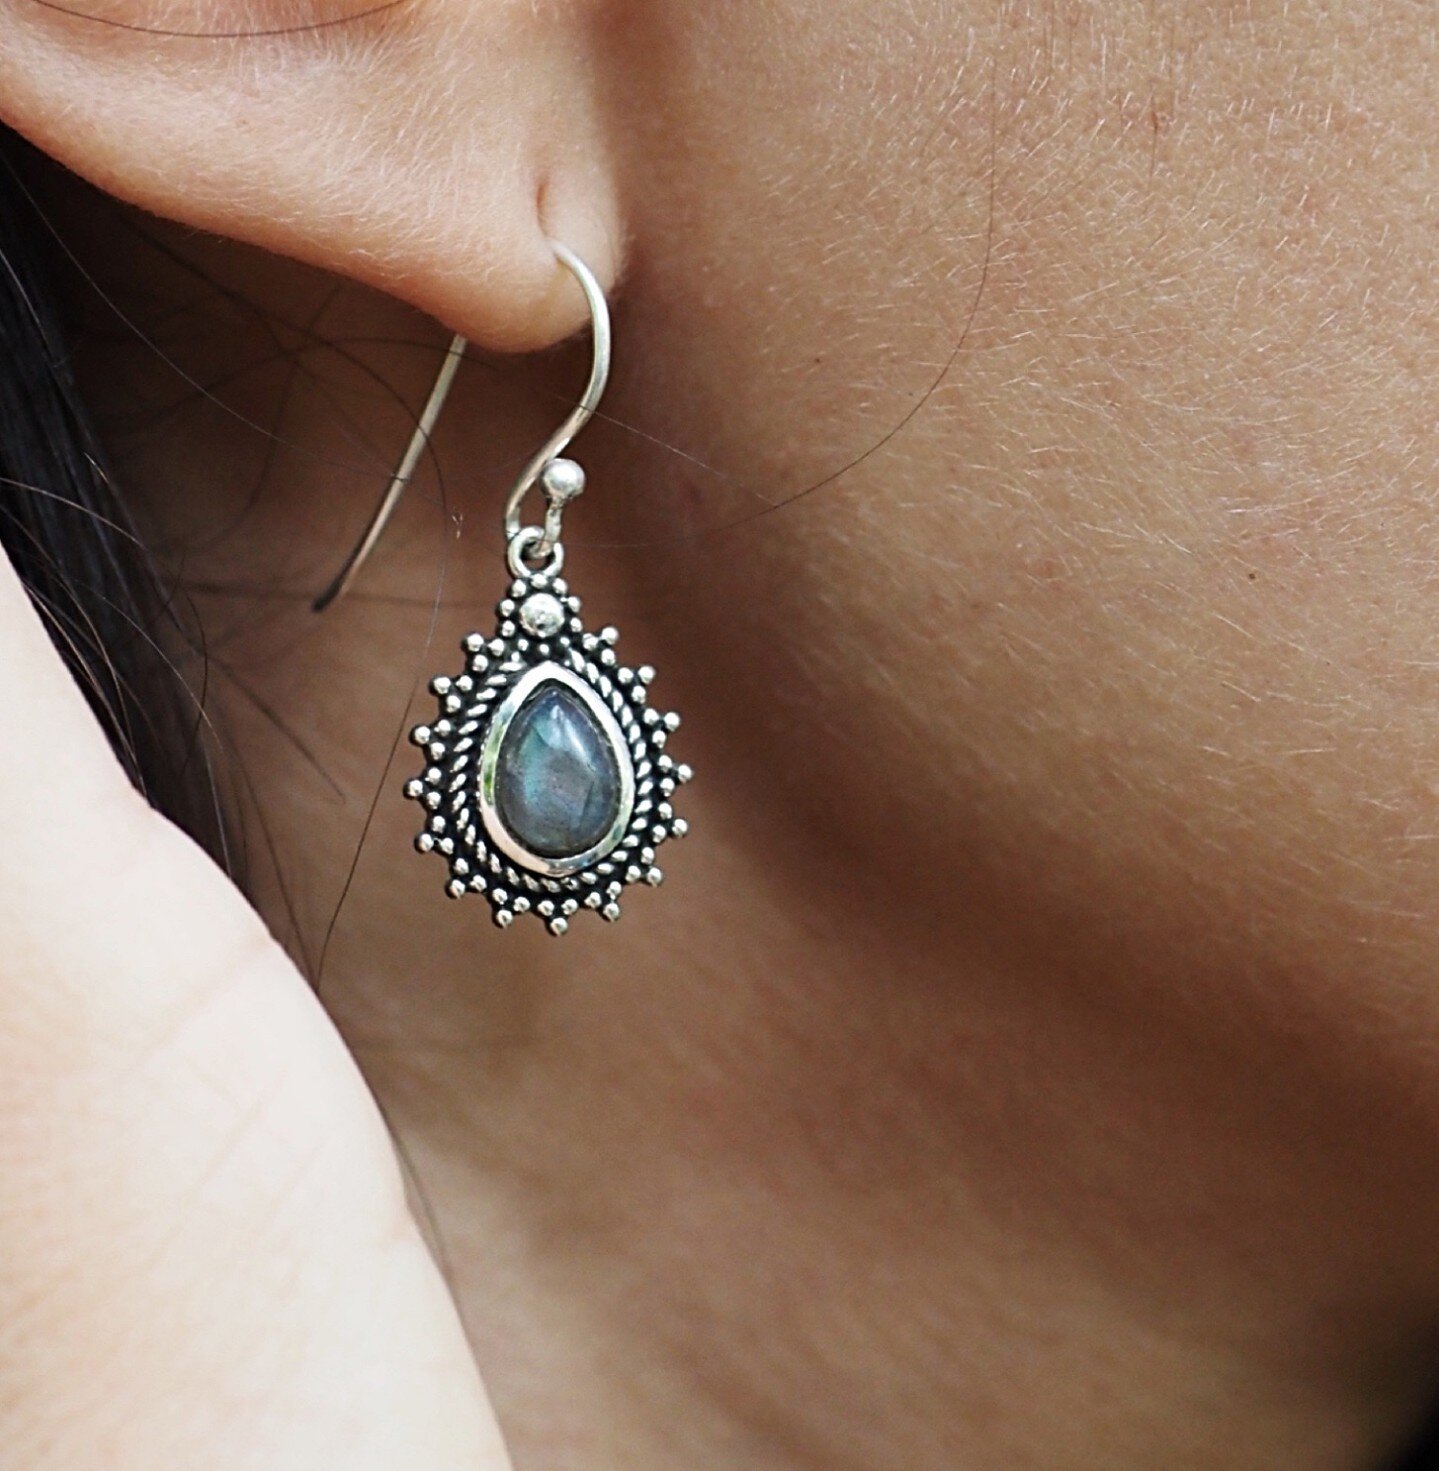 Perfect little drops 💧 The gorgeous Indu Labradorite Earrings are available online. Tap the photo to check them out 😍

#sterlingsilverearrings #earringslover #earringsaddict #bohemianearrings #bohoearrings #bohoearring #tribalearrings #ethnicearrin